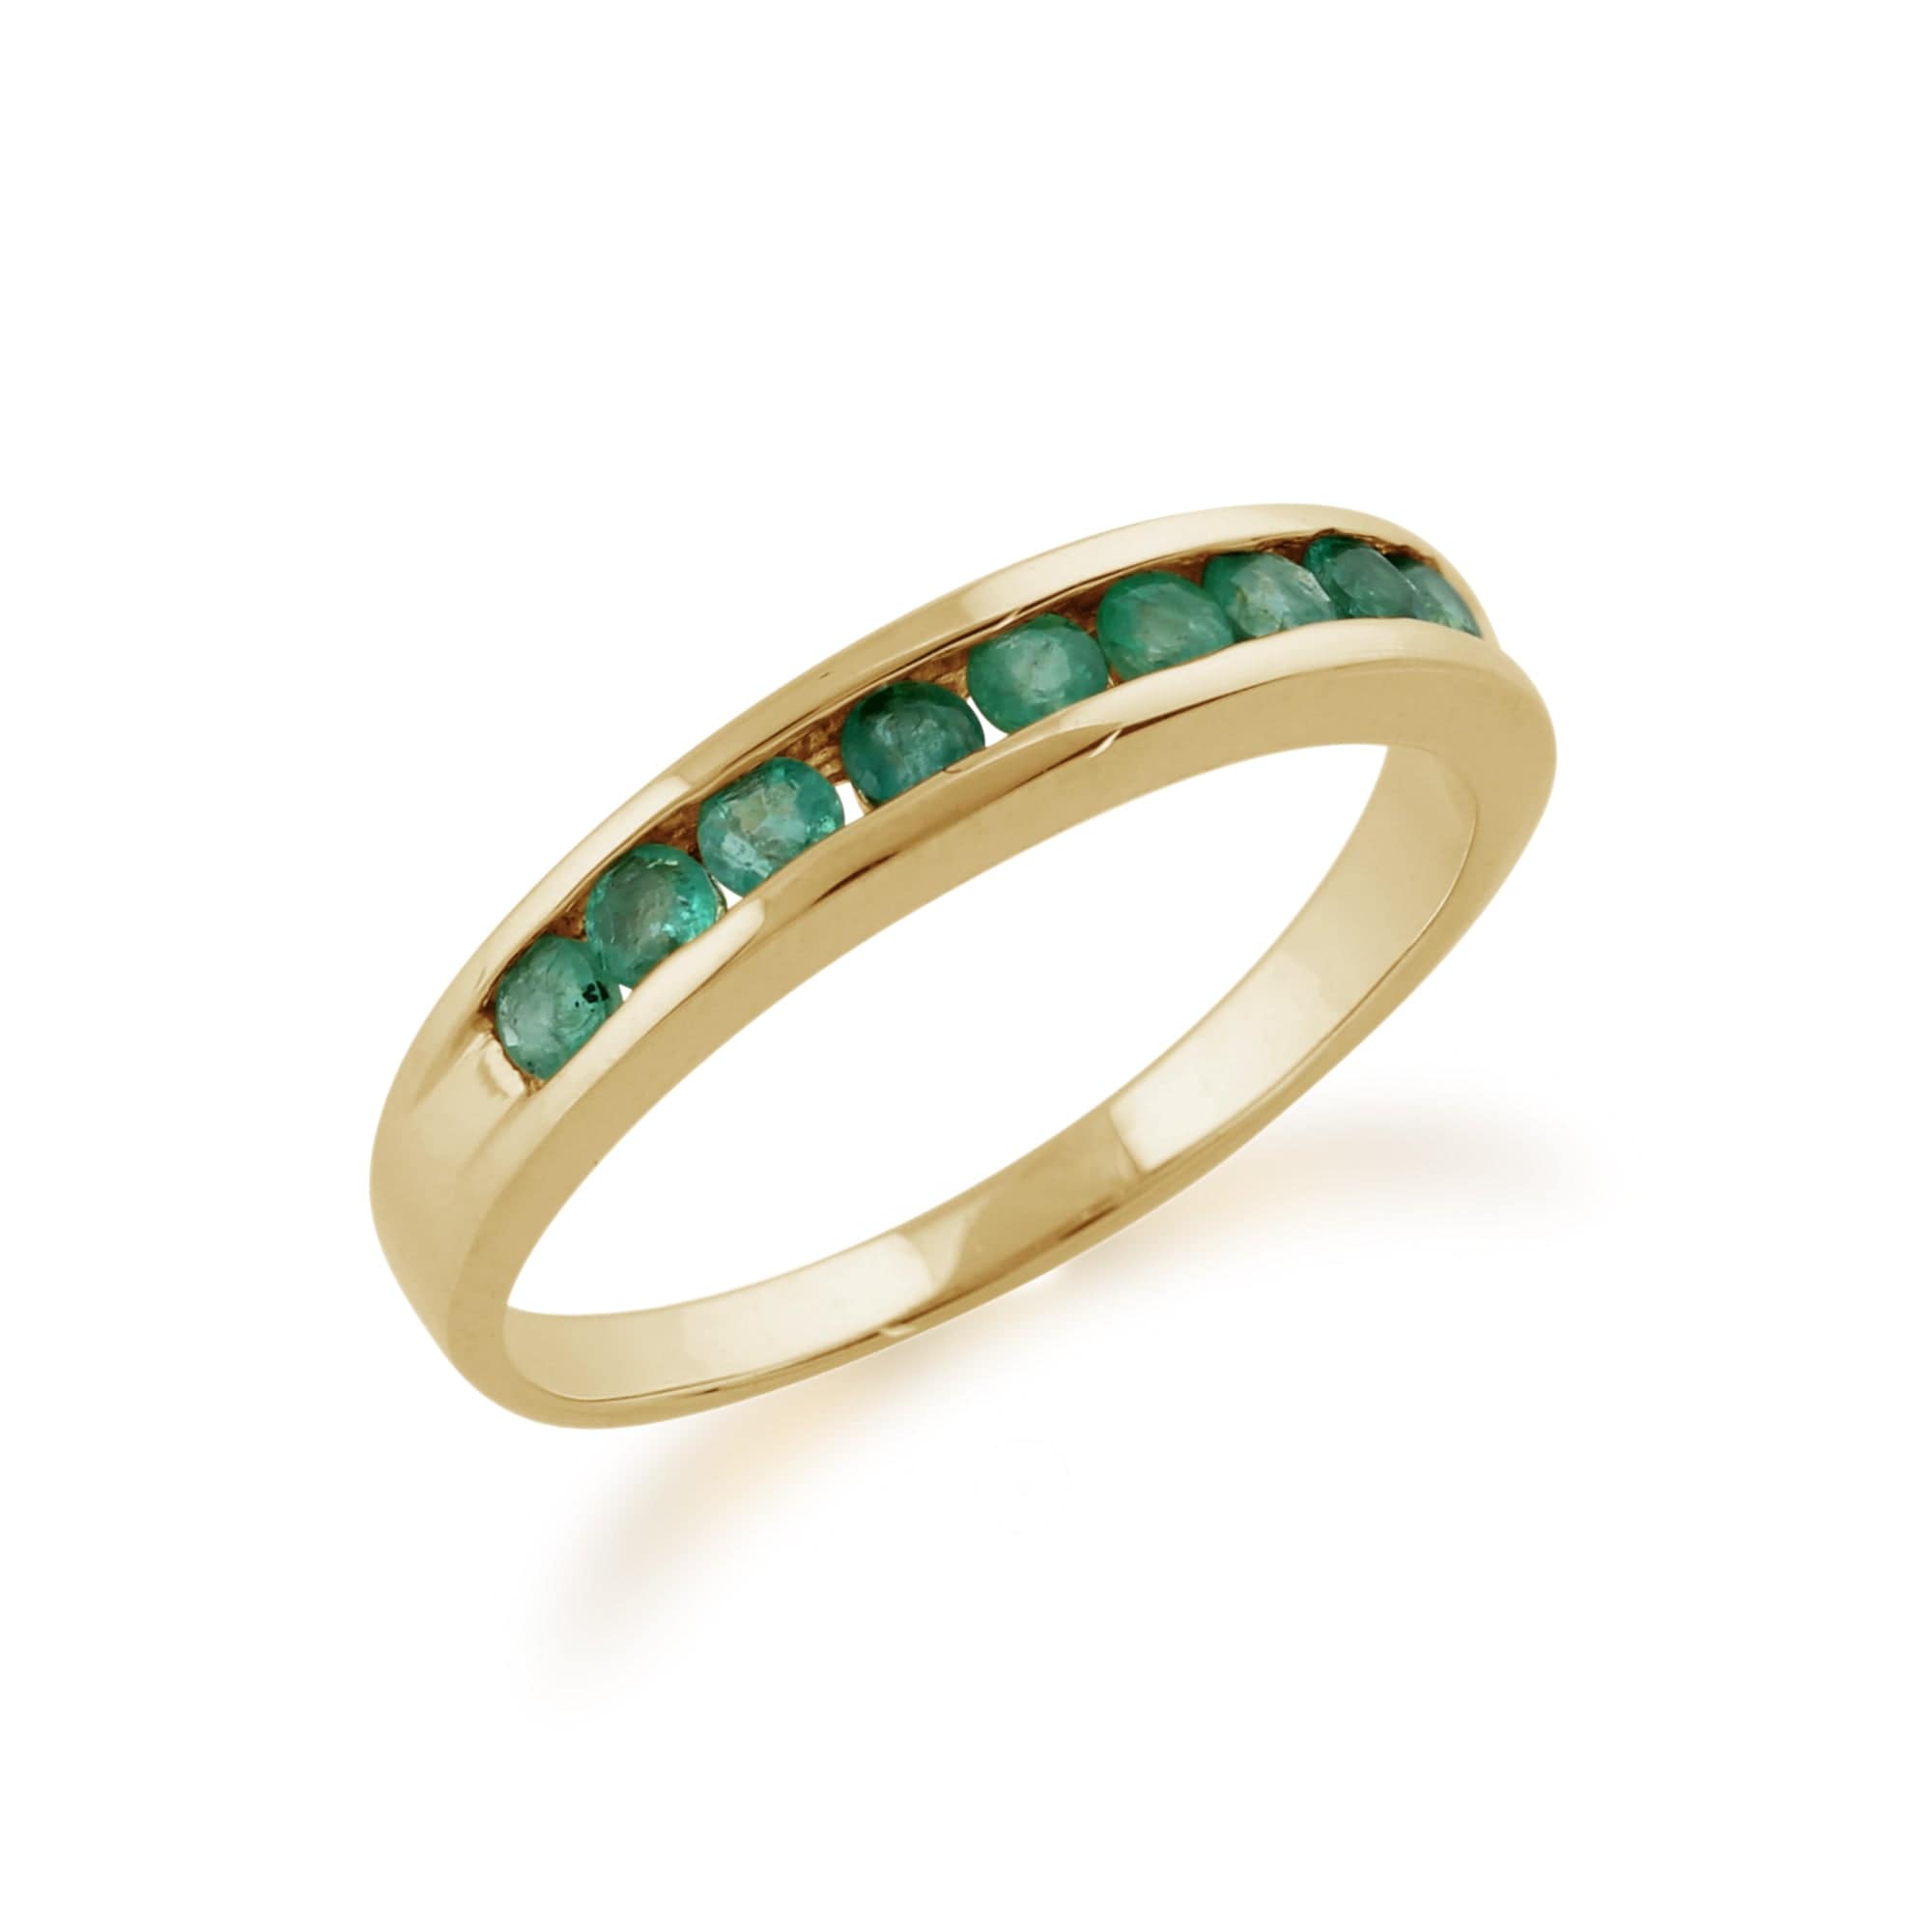 Channel Set 0.44ct Round Emerald Ring in 9ct Yellow Gold 108R2496149 Side